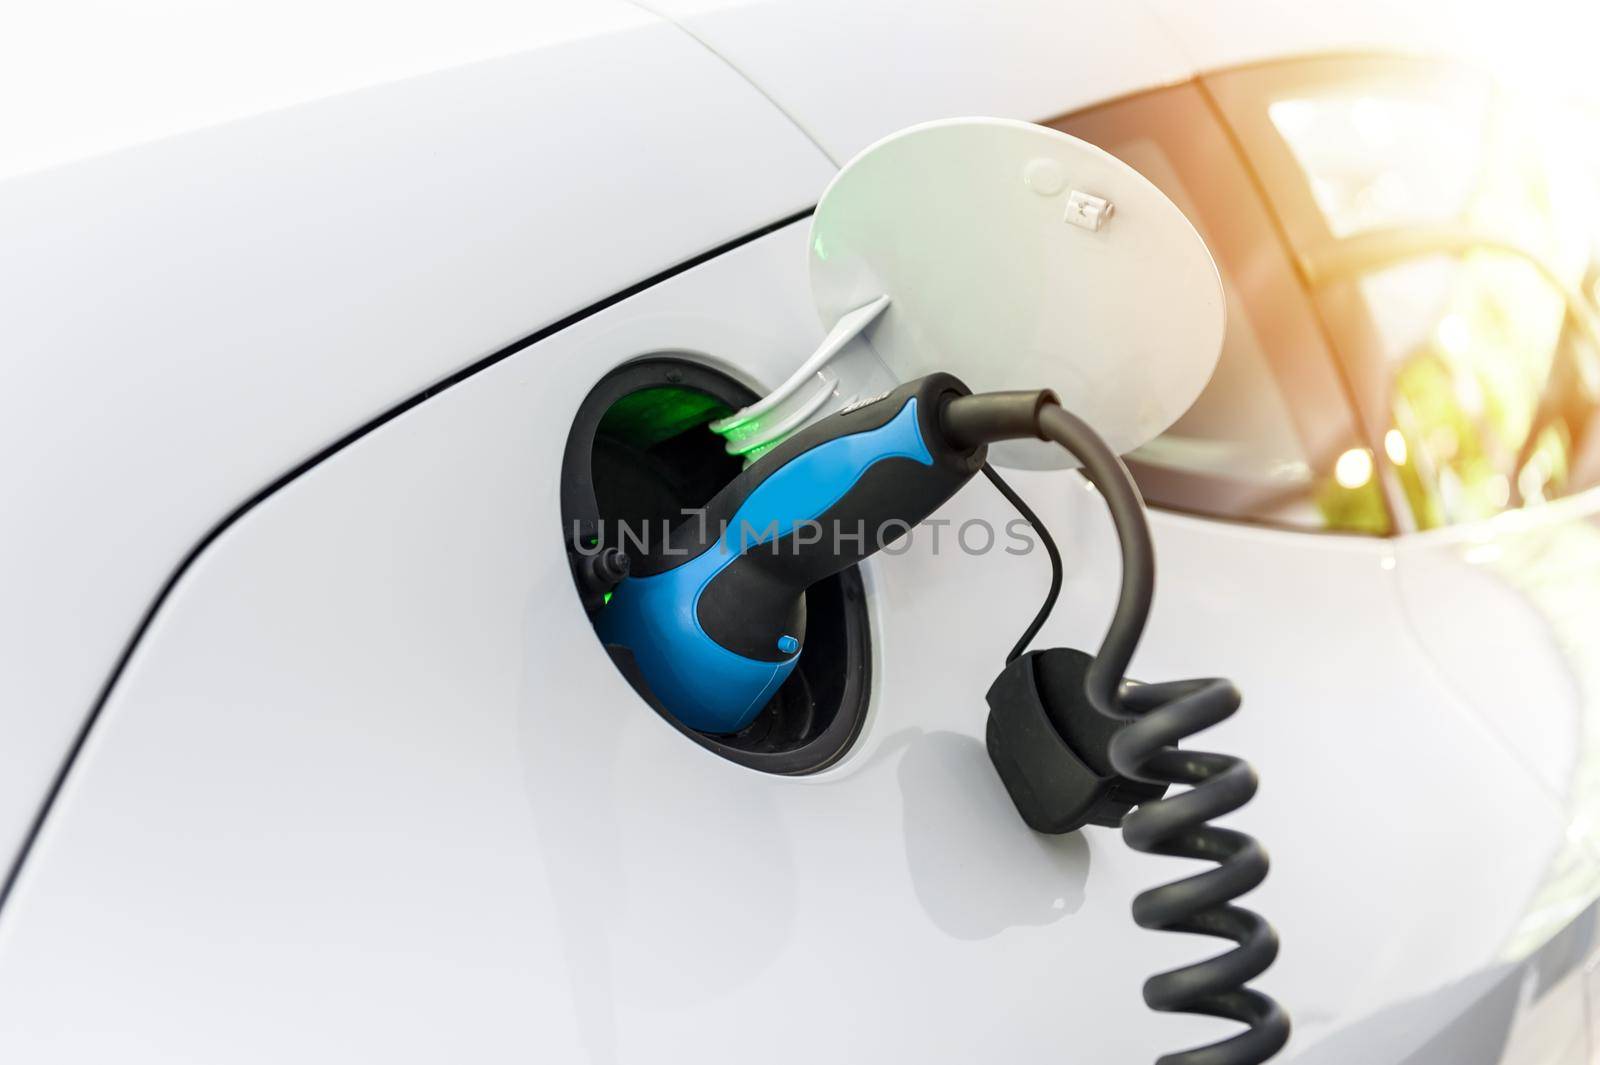 Power supply for electric car charging in sunlight